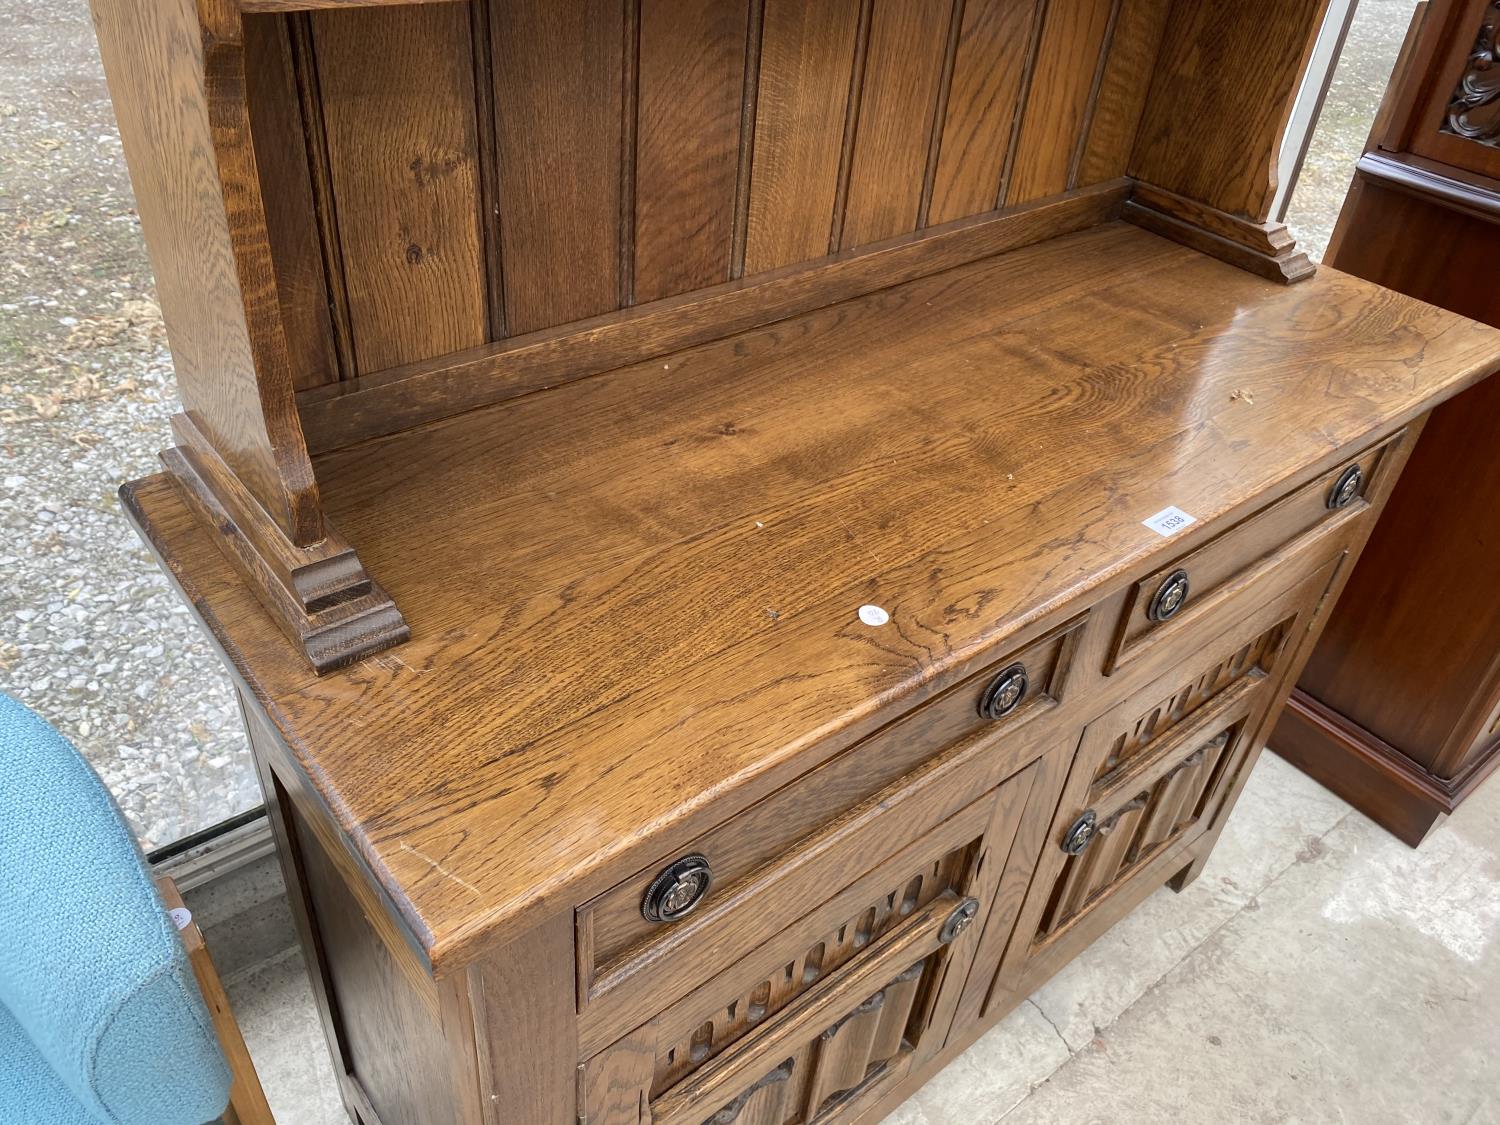 AN OAK WELSH DRESSER WITH TWO DOORS, TWO DRAWERS AND UPPER PLATE RACK - Image 3 of 4